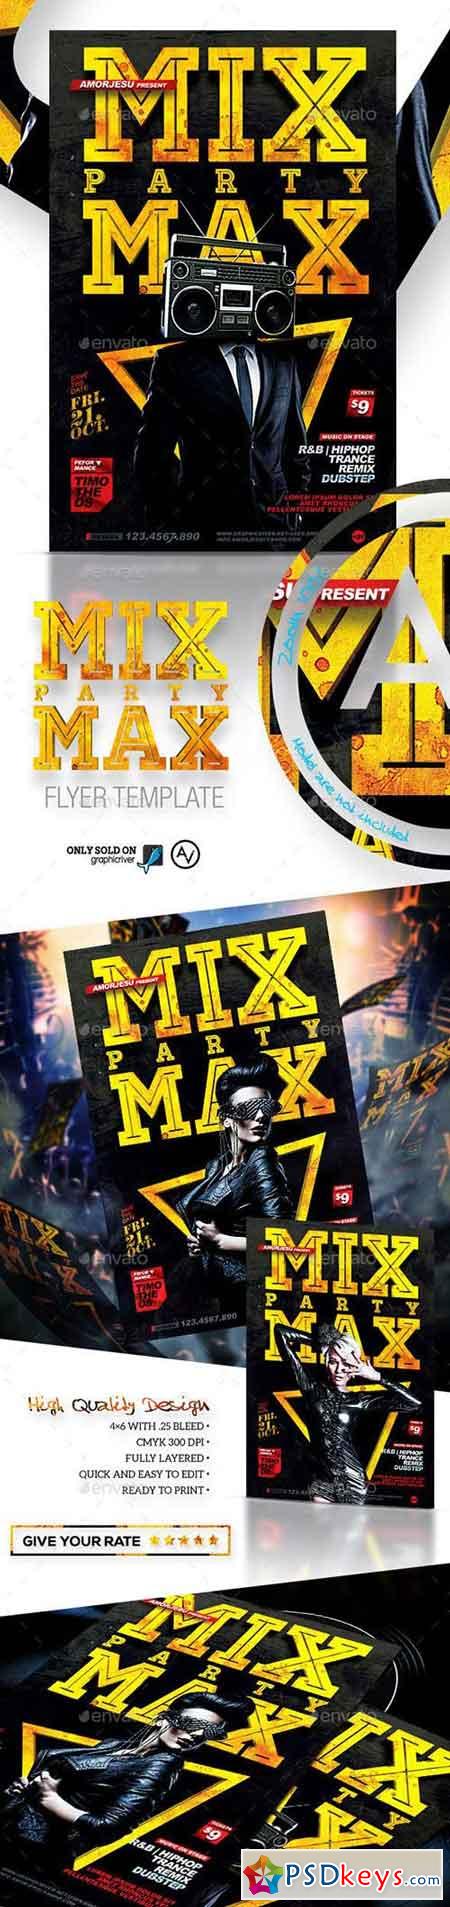 Mix Max Party Flyer Template 11739910